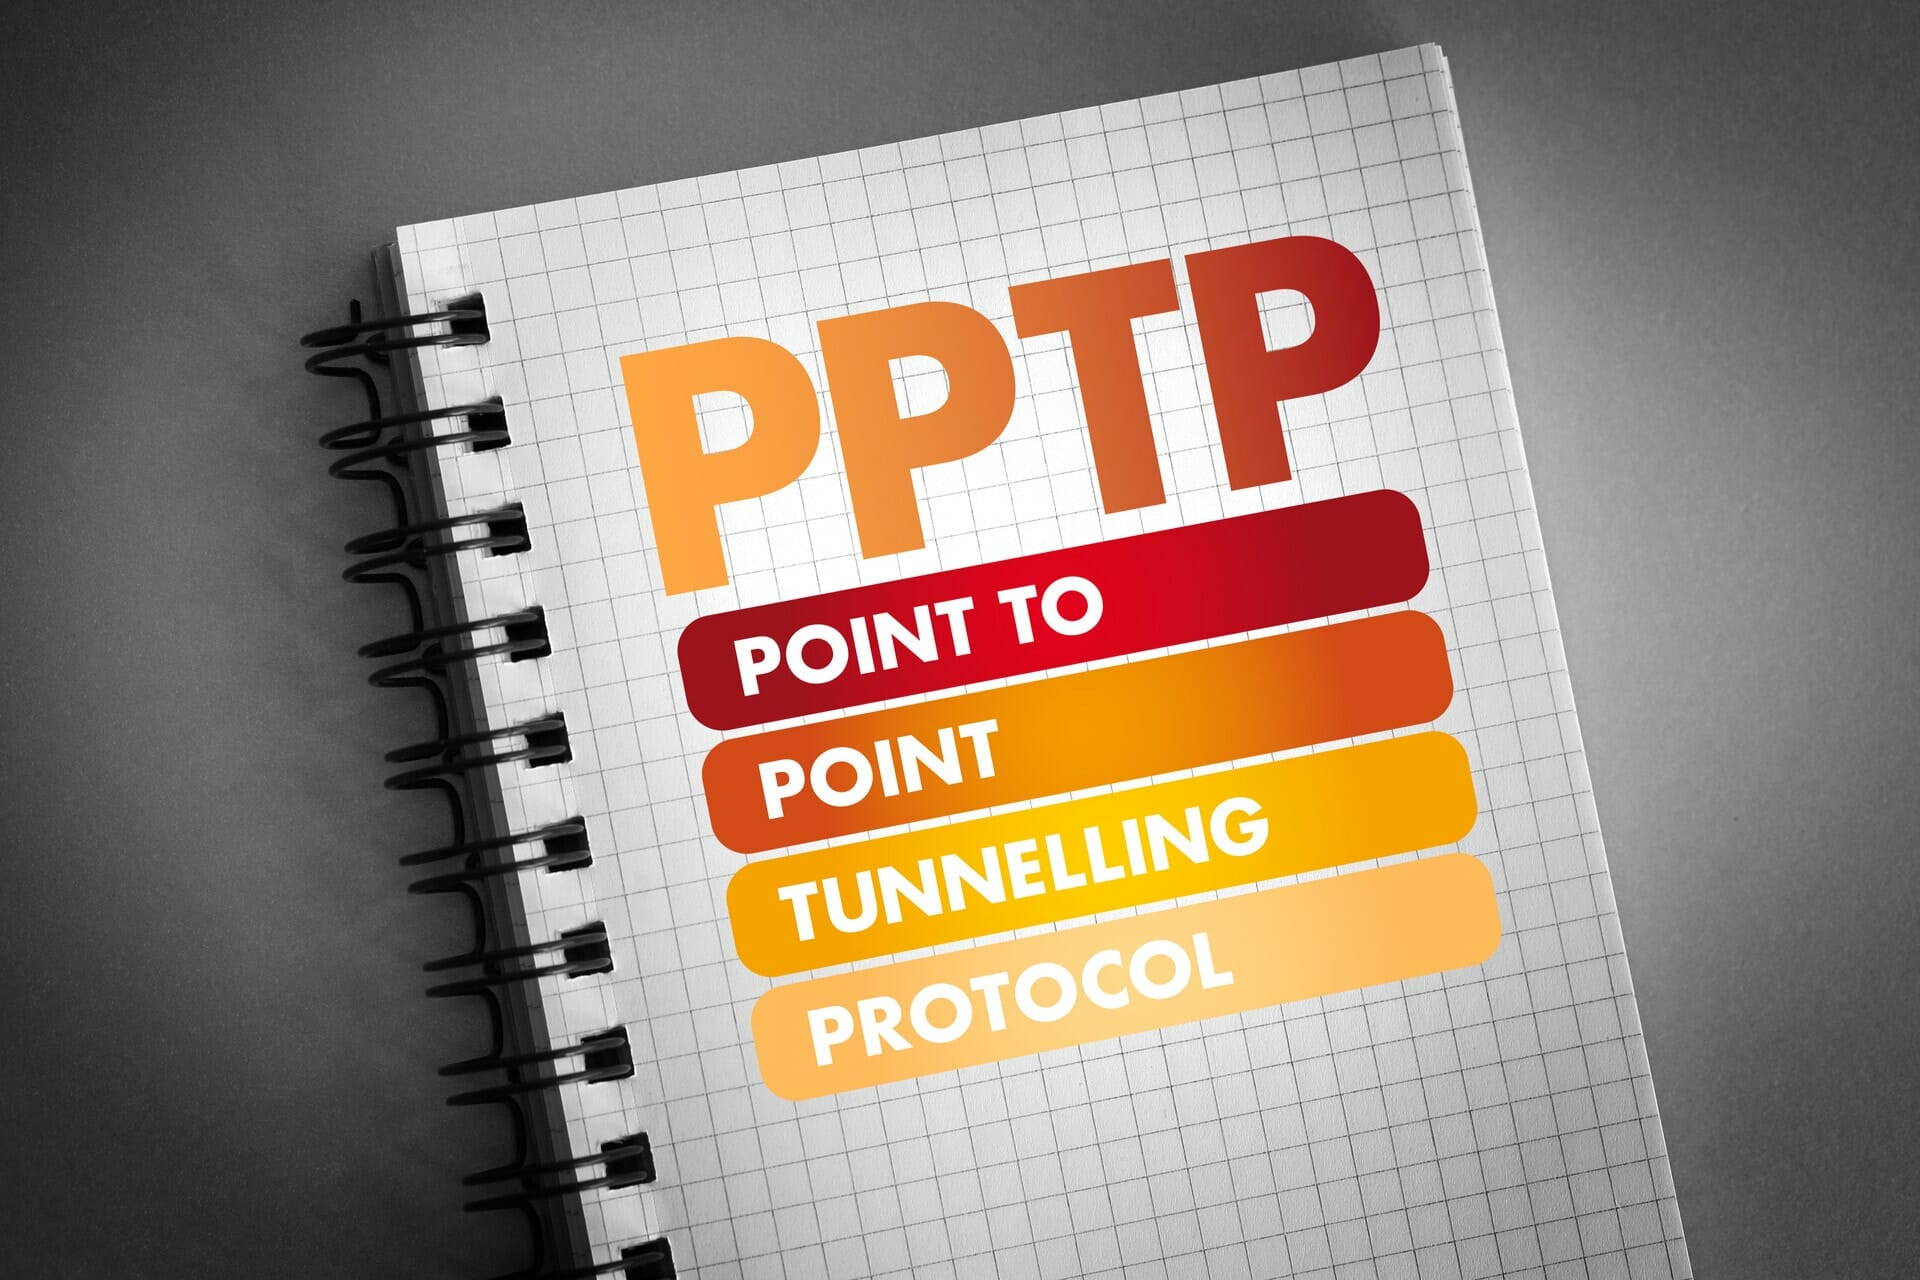 How to setup PPTP VPN on Windows 10 (Complete Guide)